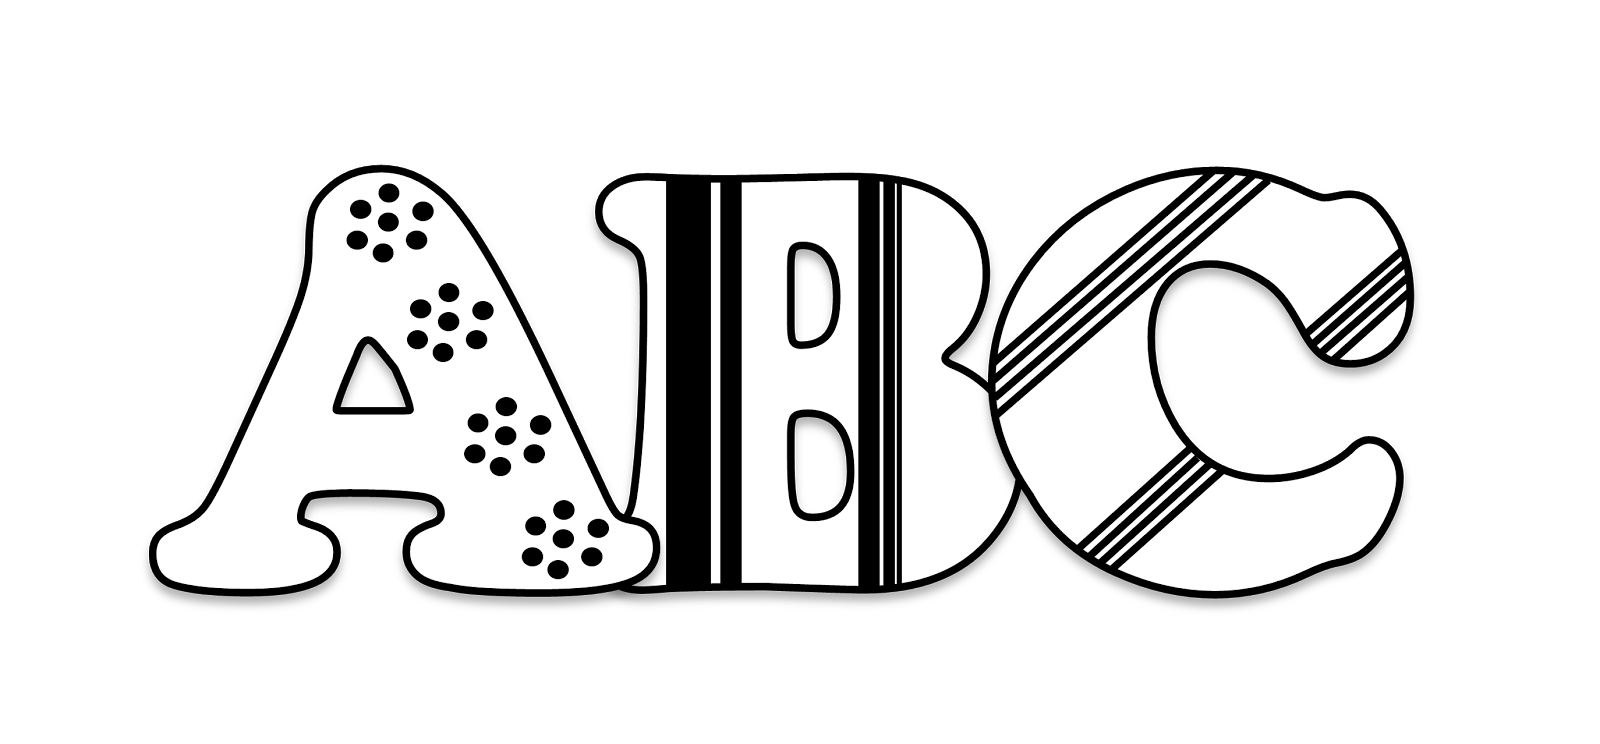 free-abc-clip-art-black-and-white-download-free-abc-clip-art-black-and-white-png-images-free